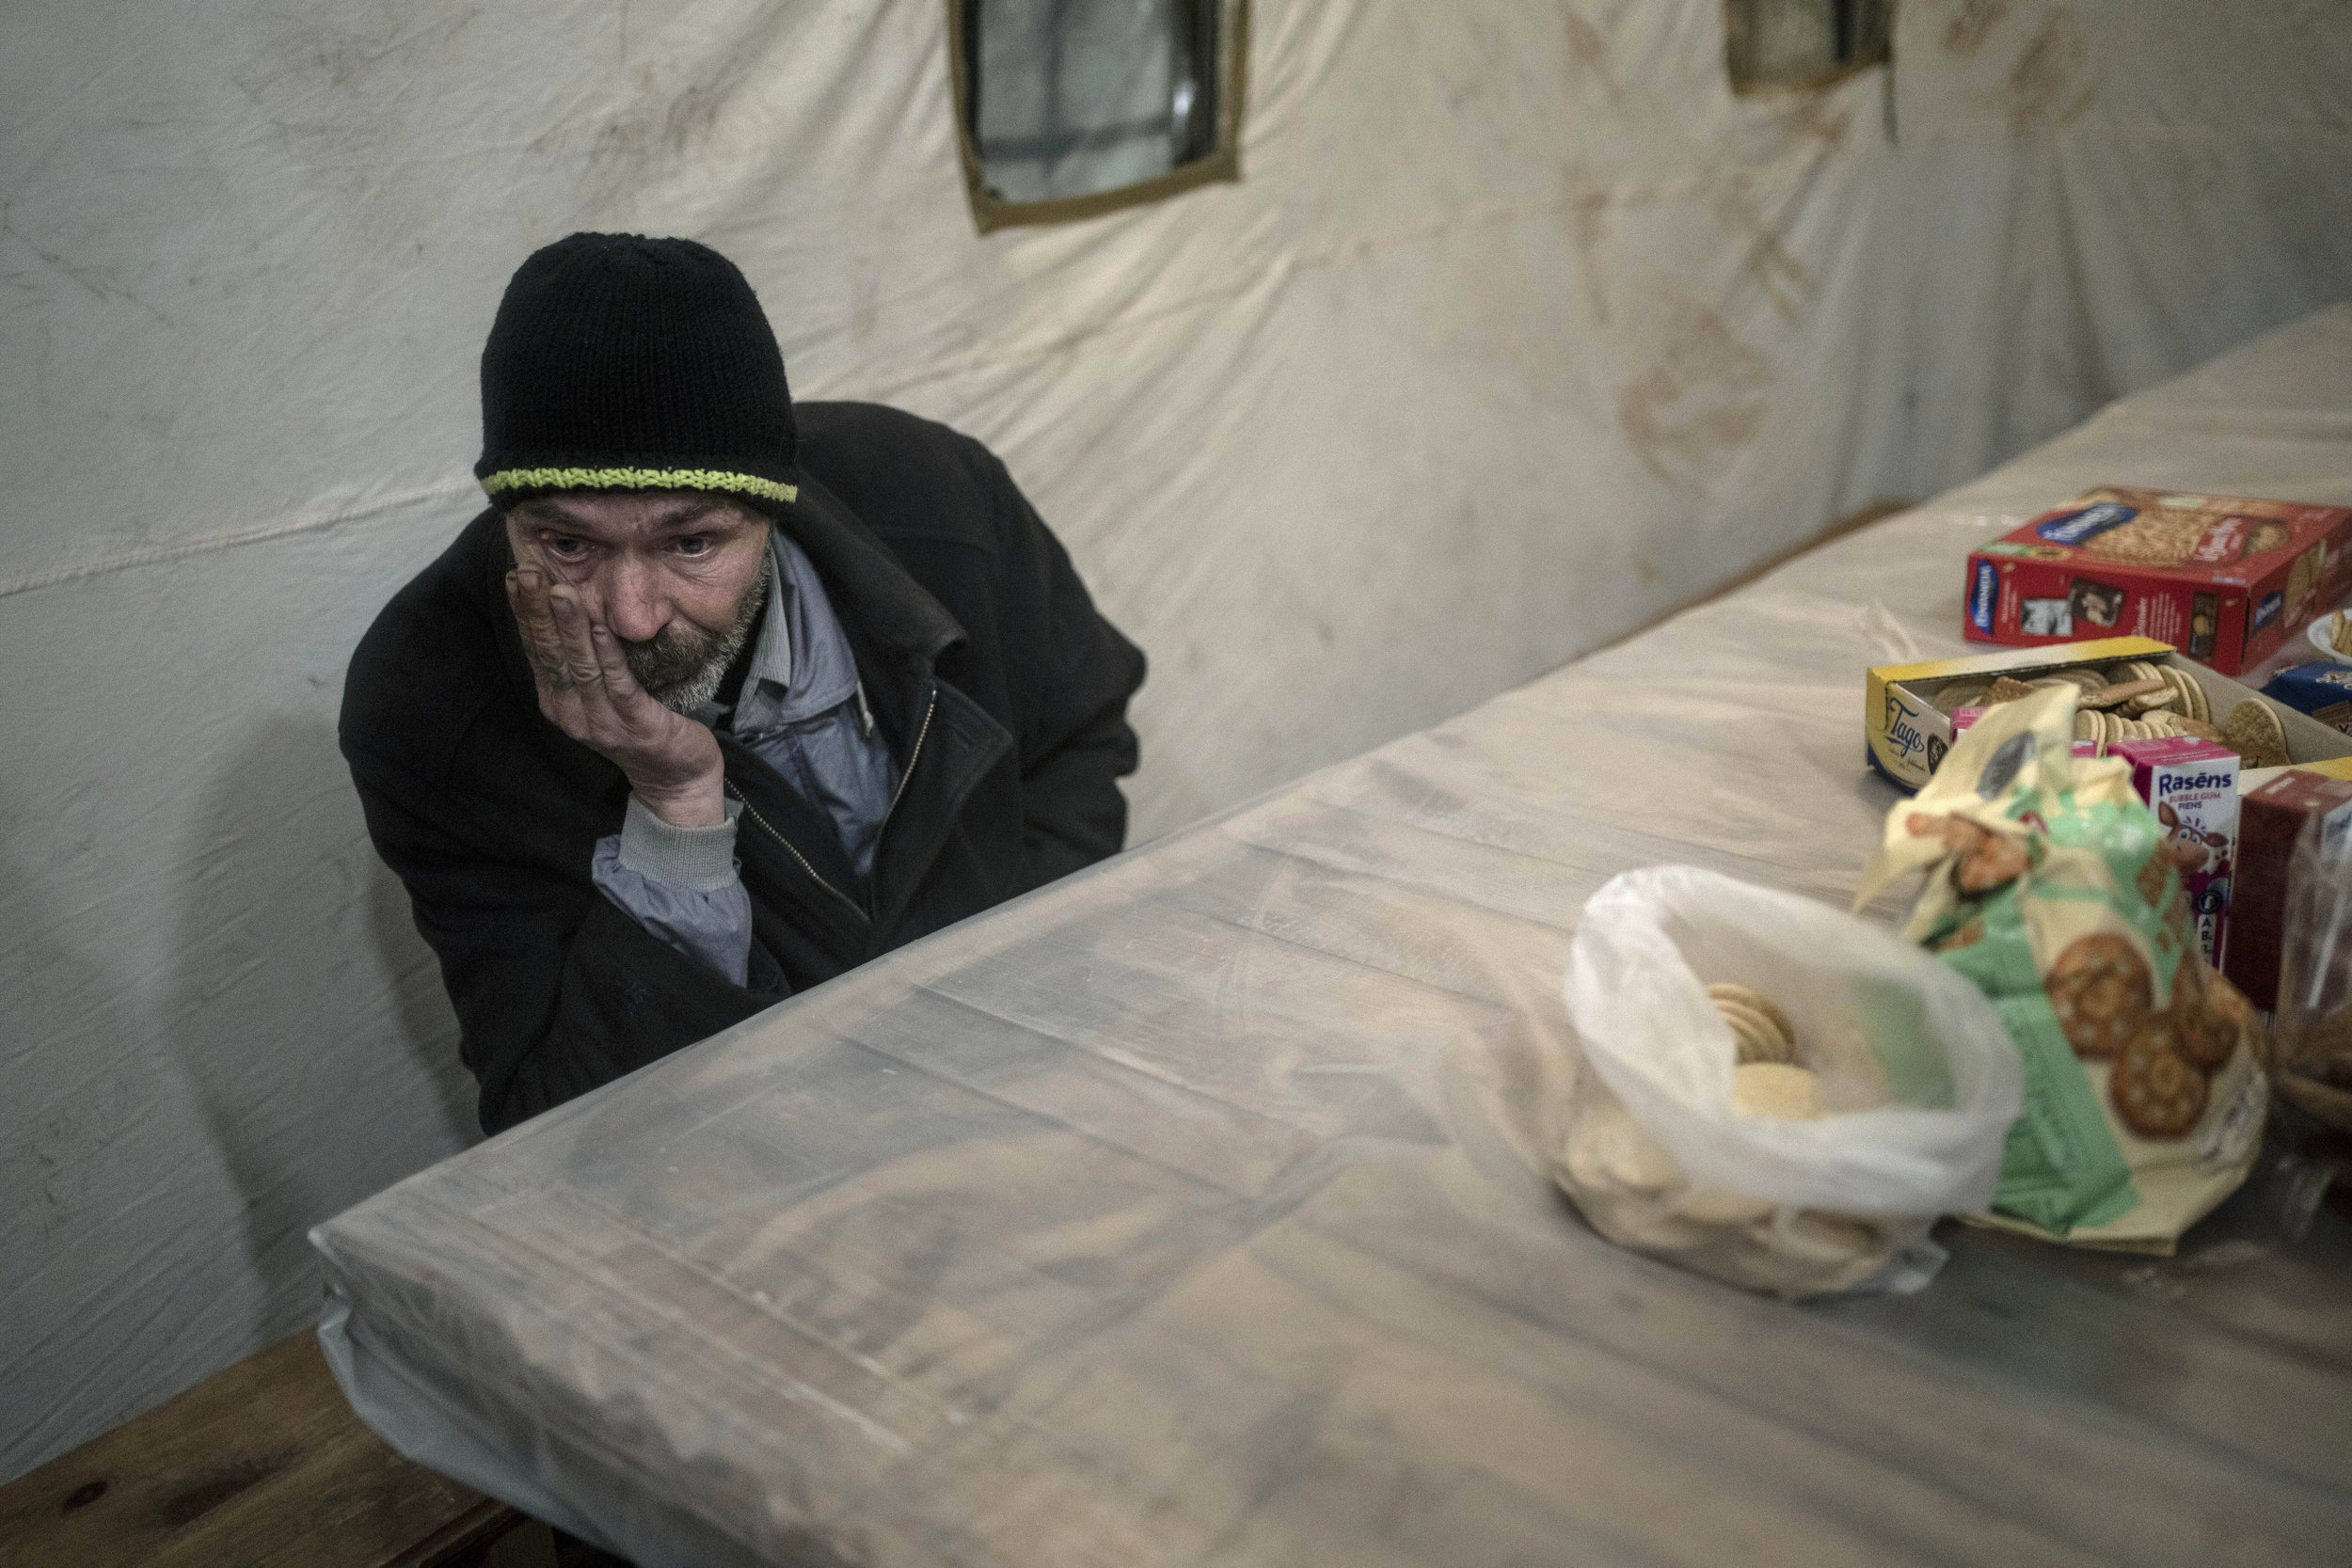  Borya, 58, evacuated from the town of Baryshivka by the Ukrainian government due to heavy fighting, waits inside a tent after arriving in Brovary, on the outskirts of Kyiv, Ukraine, Tuesday, March 29, 2022. (AP Photo/Rodrigo Abd) 